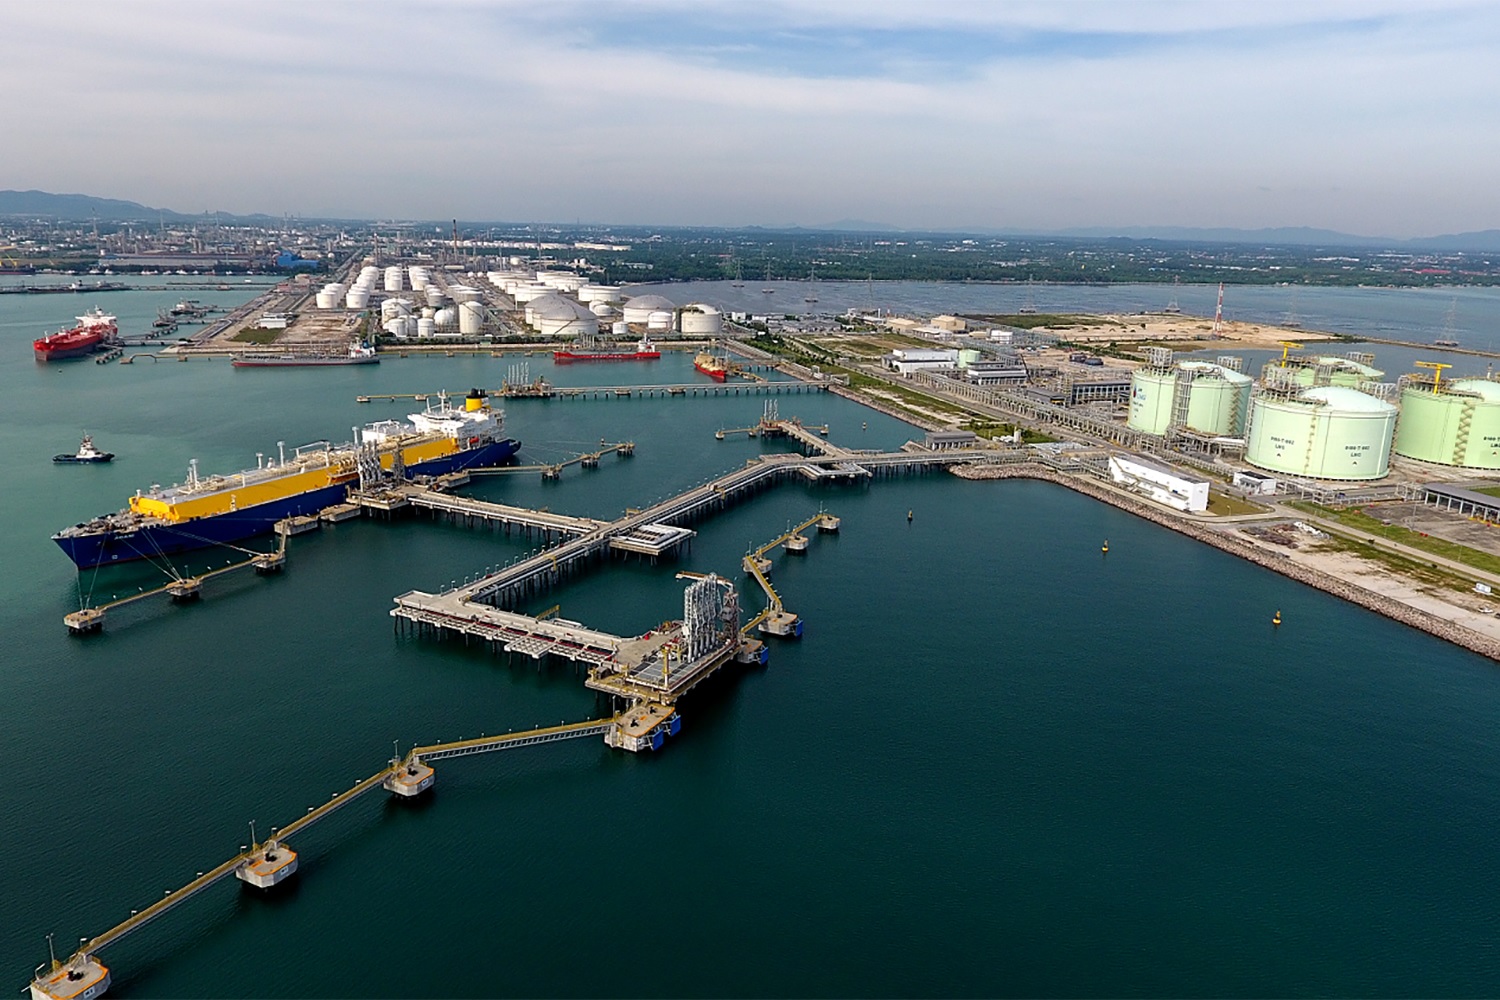 B.Grimm and PTT team up for Thailand LNG expansion